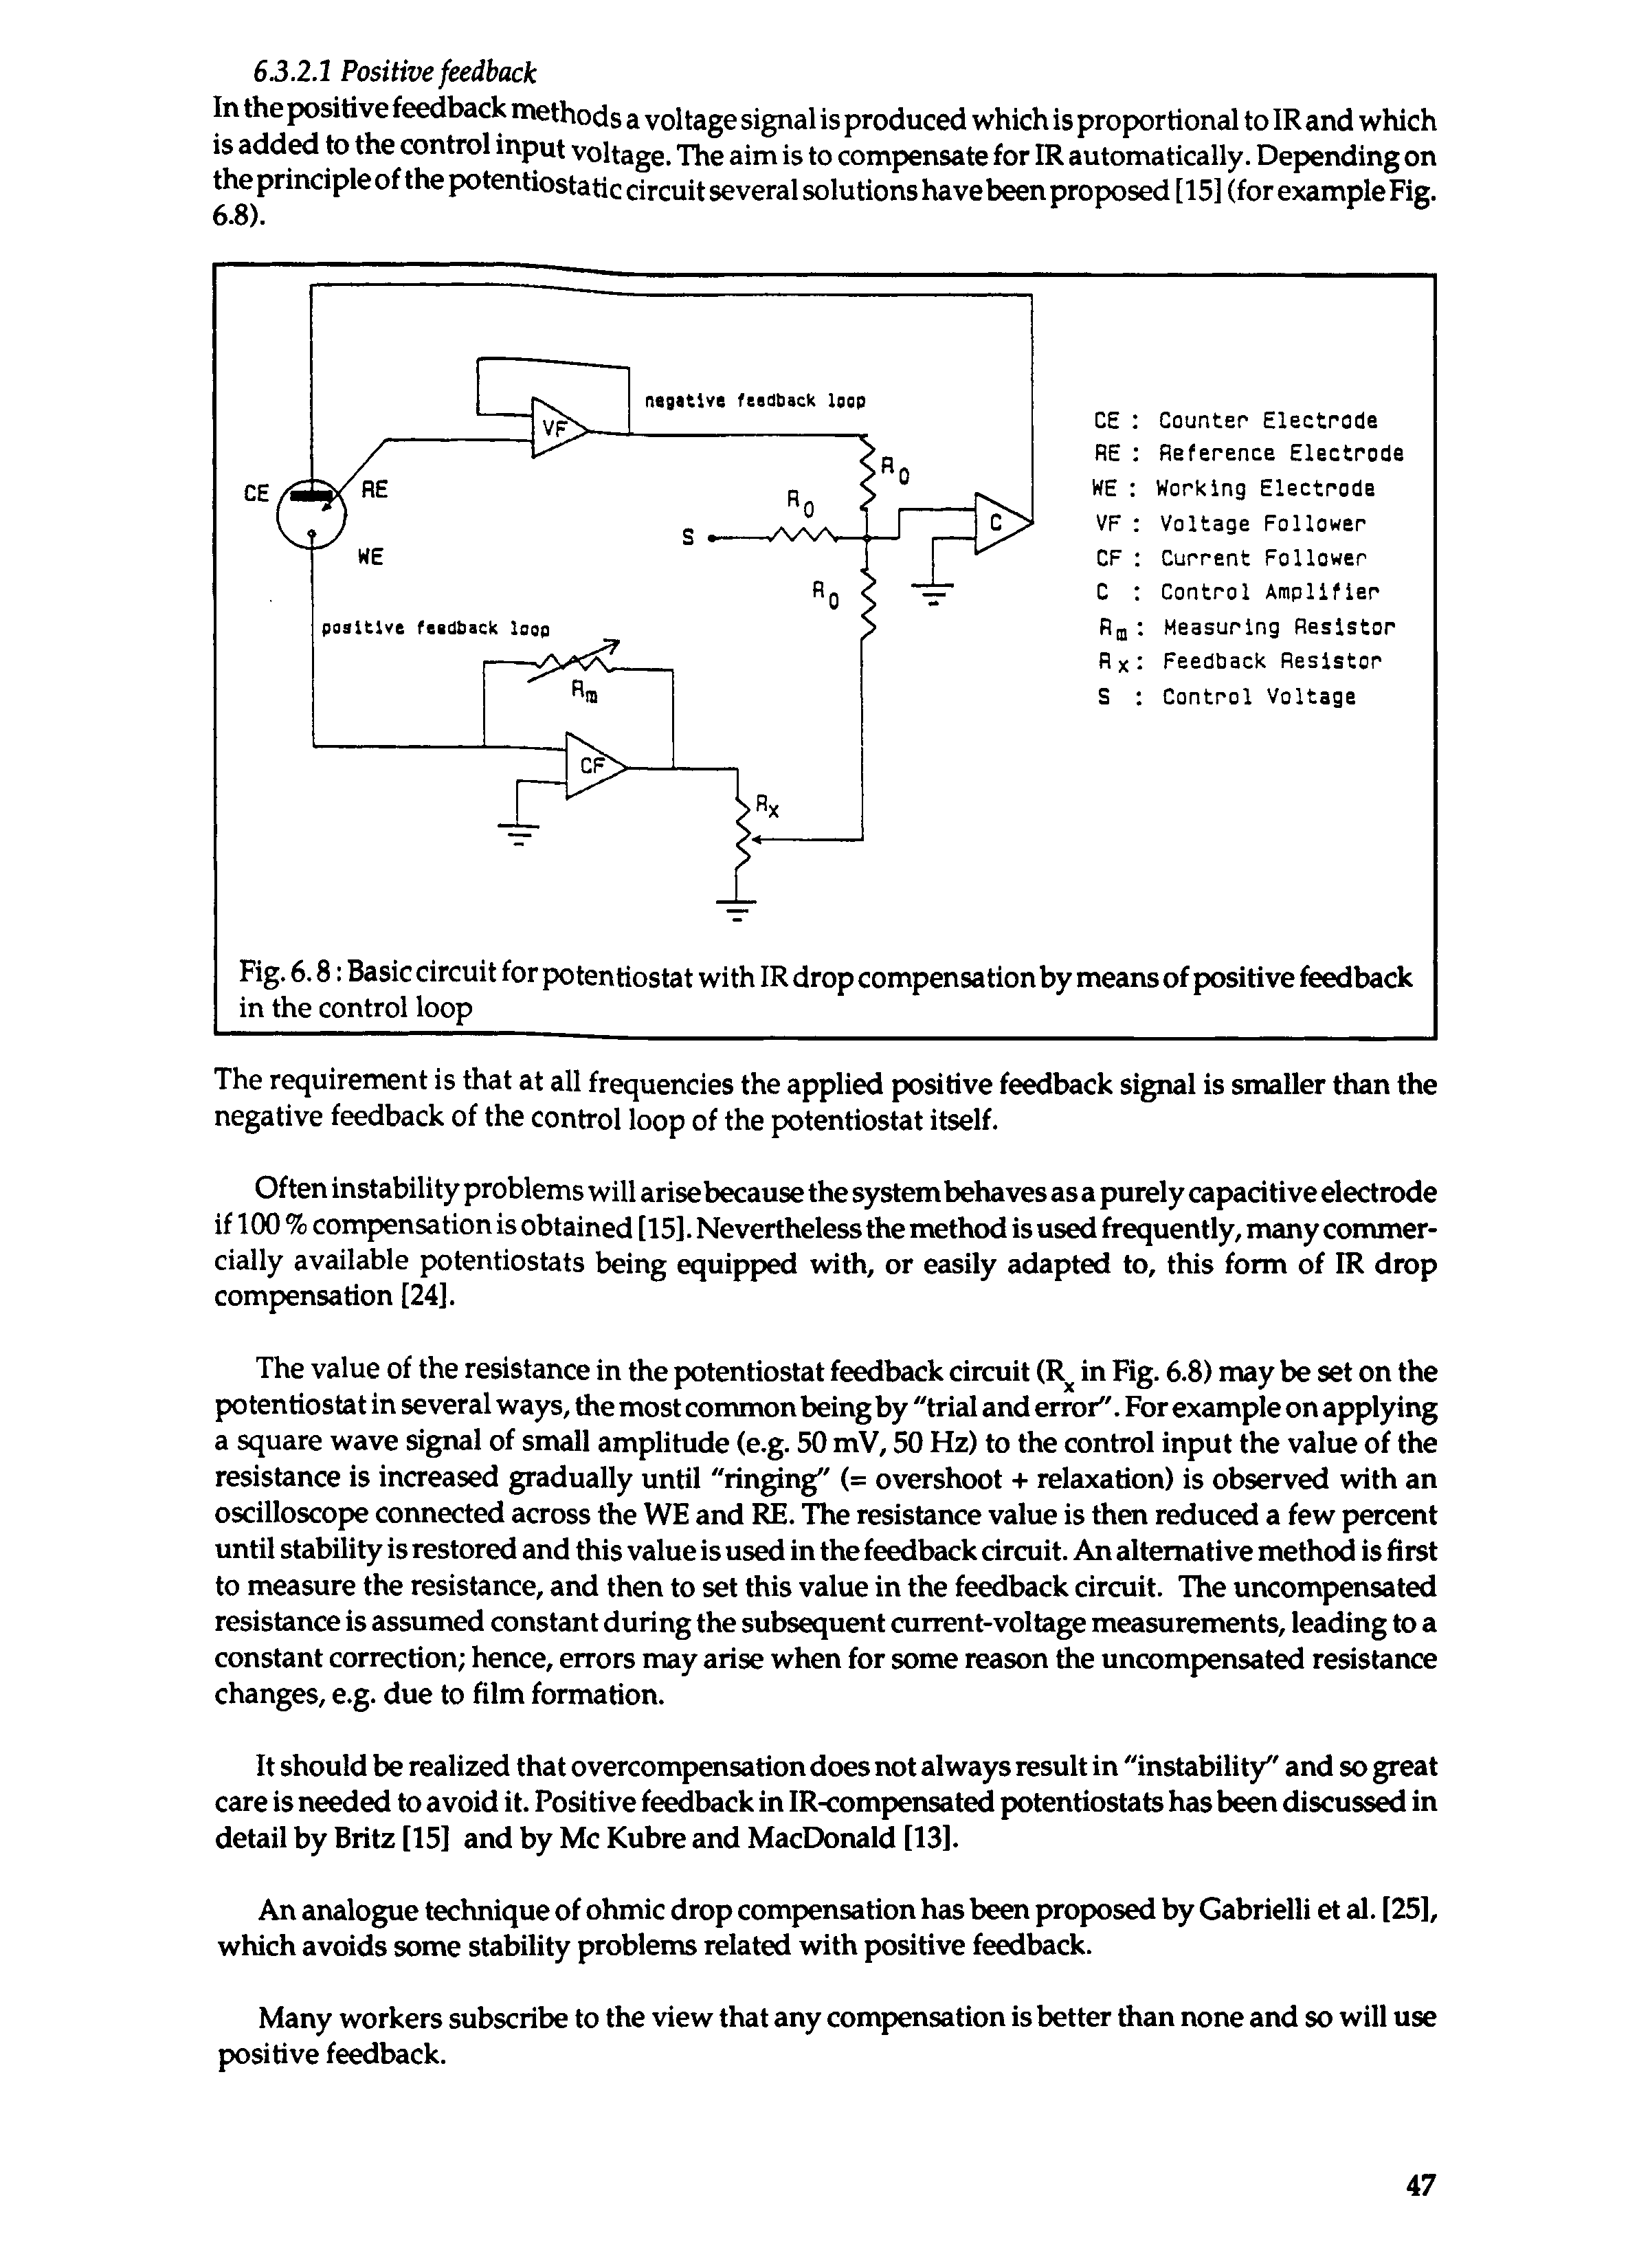 Fig. 6.8 Basic circuit for potentiostat with IR drop compensation by means of positive feedback in the control loop...